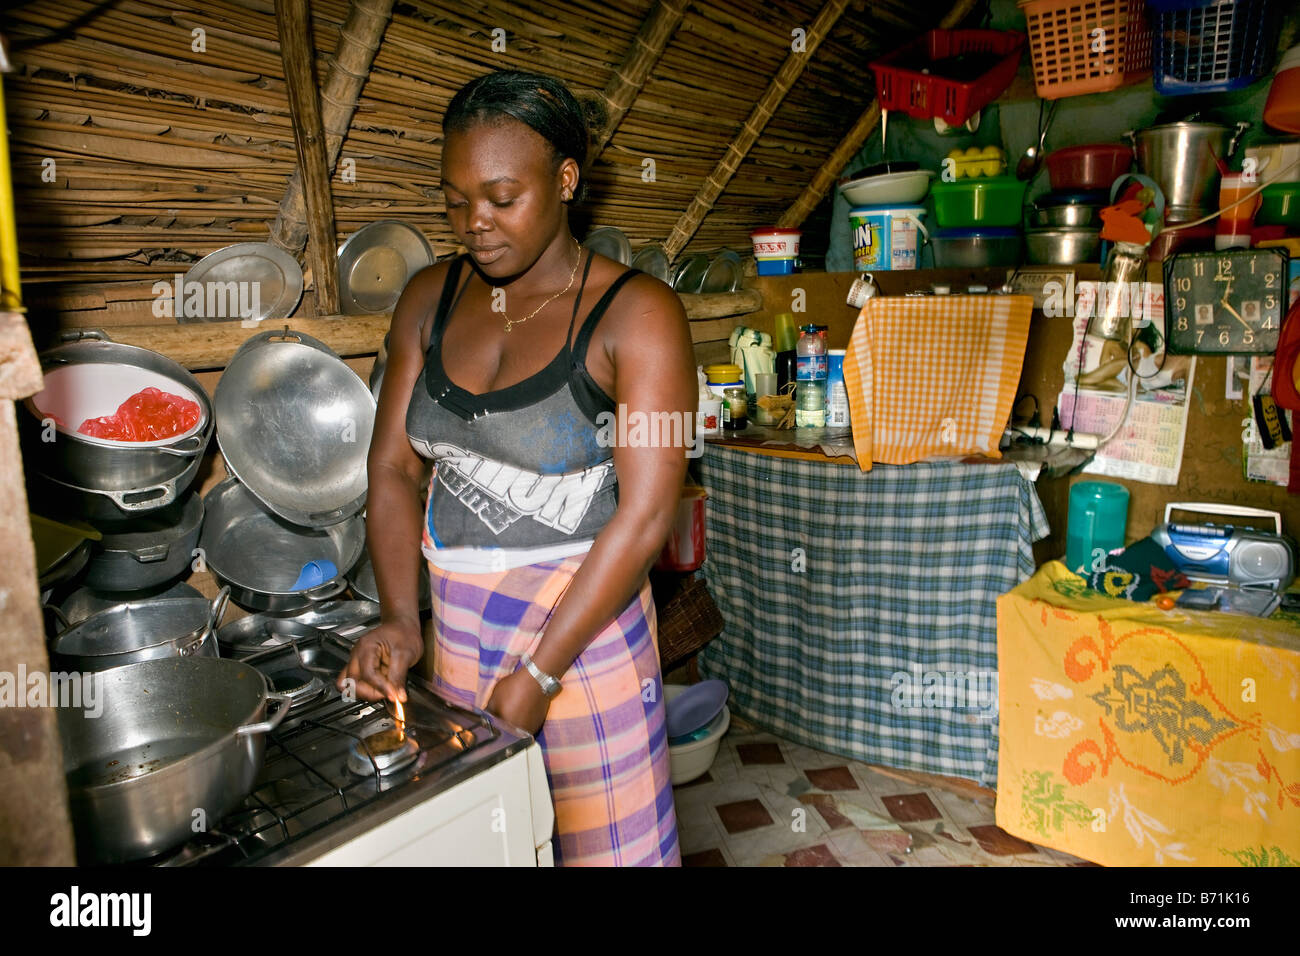 Suriname, Laduani, at the bank of the Boven Suriname river. Woman from Saramaccaner tribe cooking in kitchen. Stock Photo